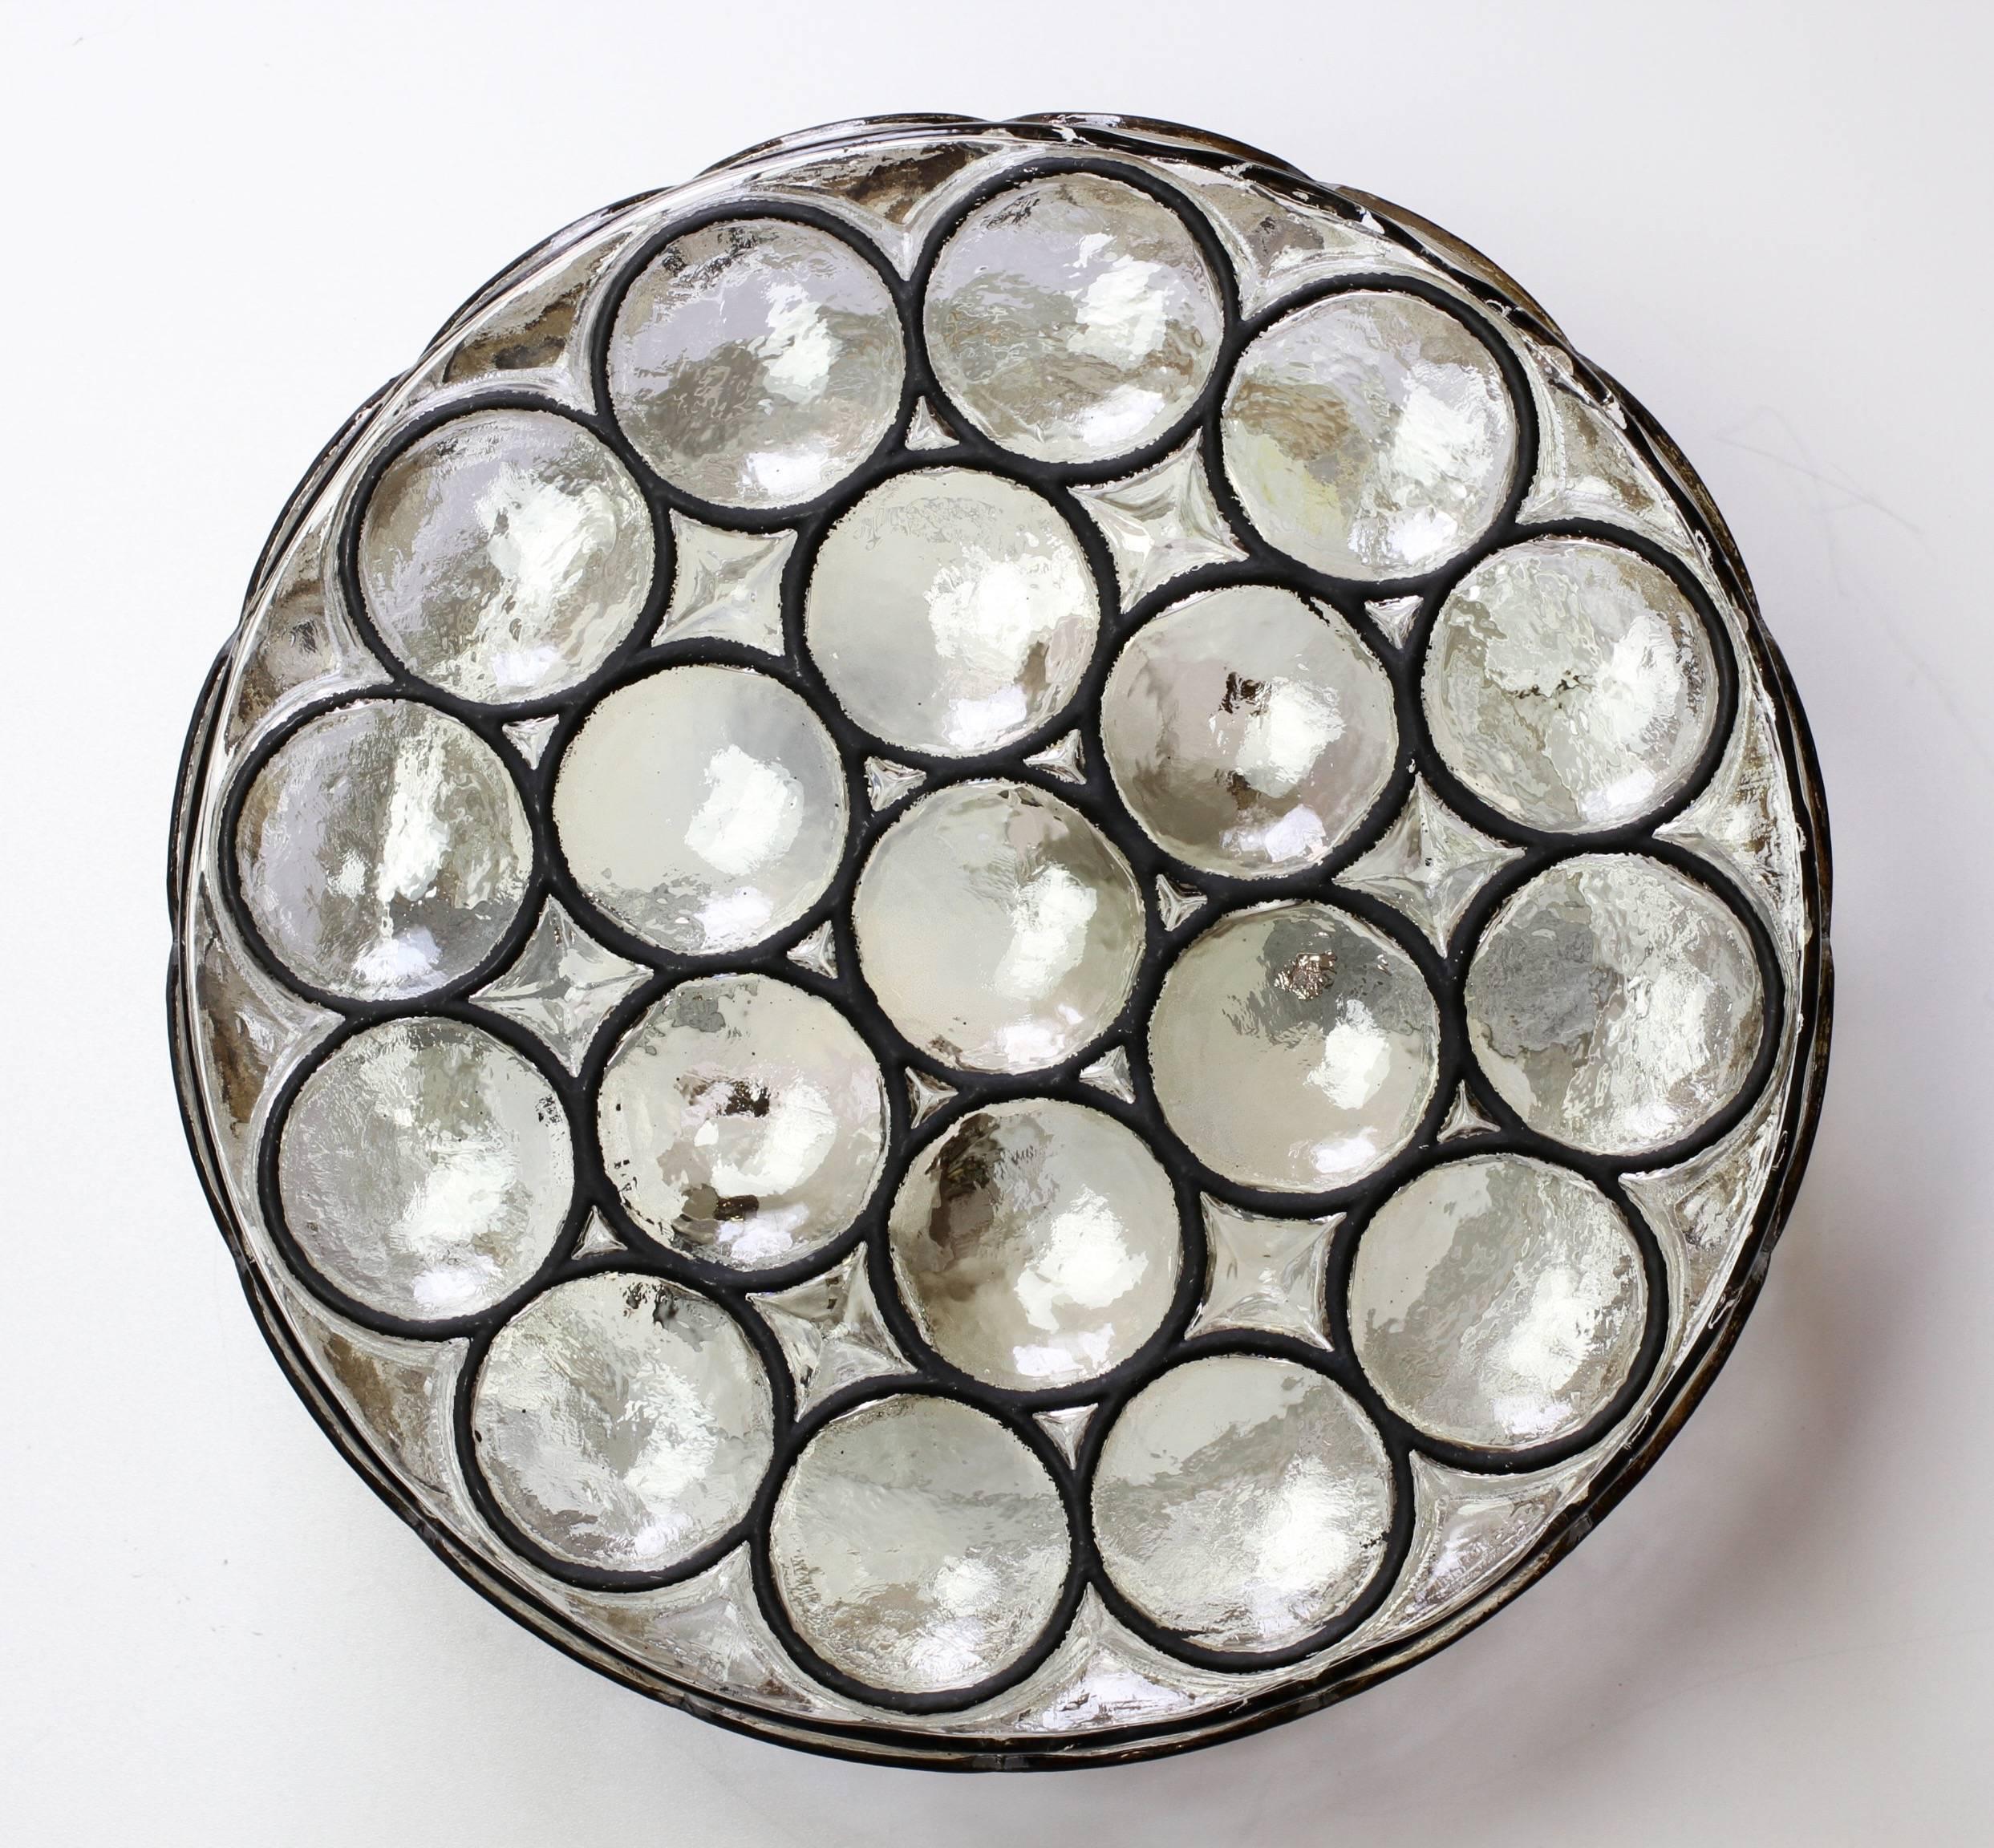 A single large double socketed circular iron and glass flush mount lights / sconces by Glashütte Limburg, Germany, circa 1965. Featuring thick heavy blown glass with concaved round "Iron" rings which cast a wonderful light across a wall or